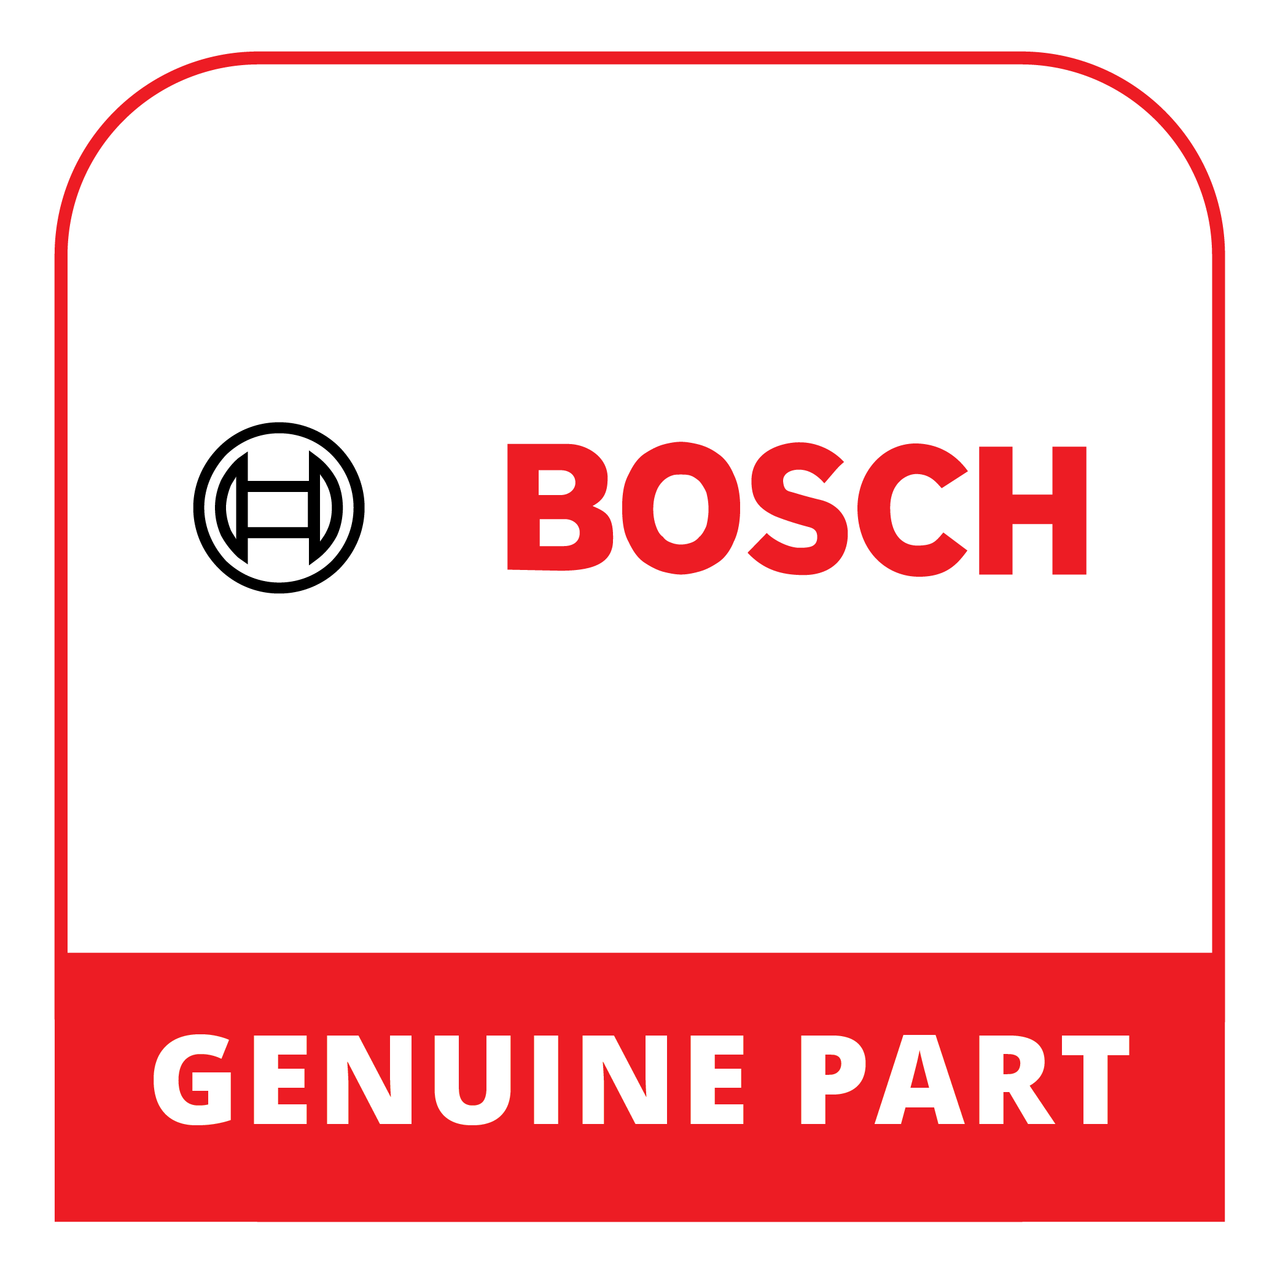 Bosch (Thermador) 12029003 - Cable - Genuine Bosch (Thermador) Part